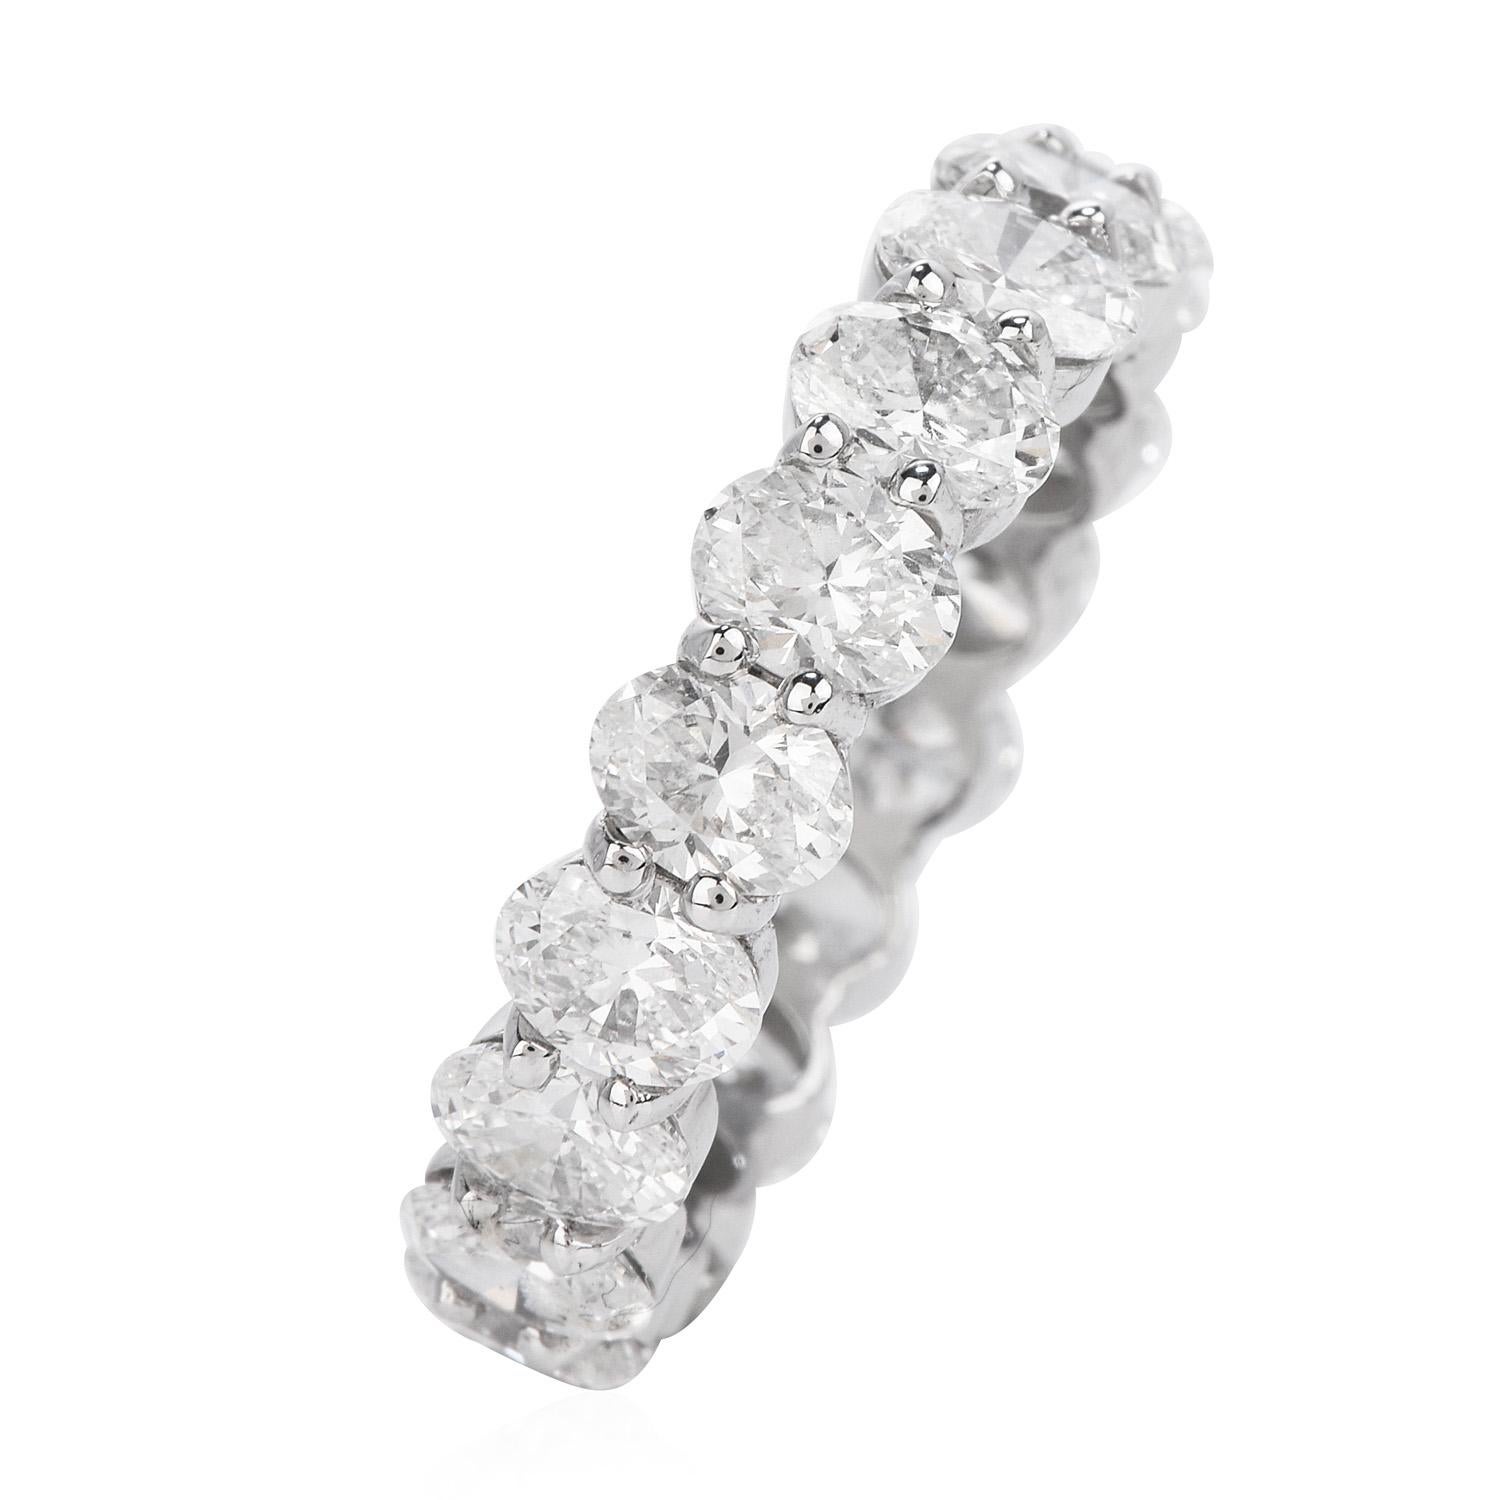 Sparkling from every angle, this eternity Wedding band ring with Oval Diamonds is the perfect compliment for any bridal set!

Crafted in solid 14K white gold, it is adorned by (18) oval cut, pave set, genuine diamonds weighing

in total 4.32 carats,